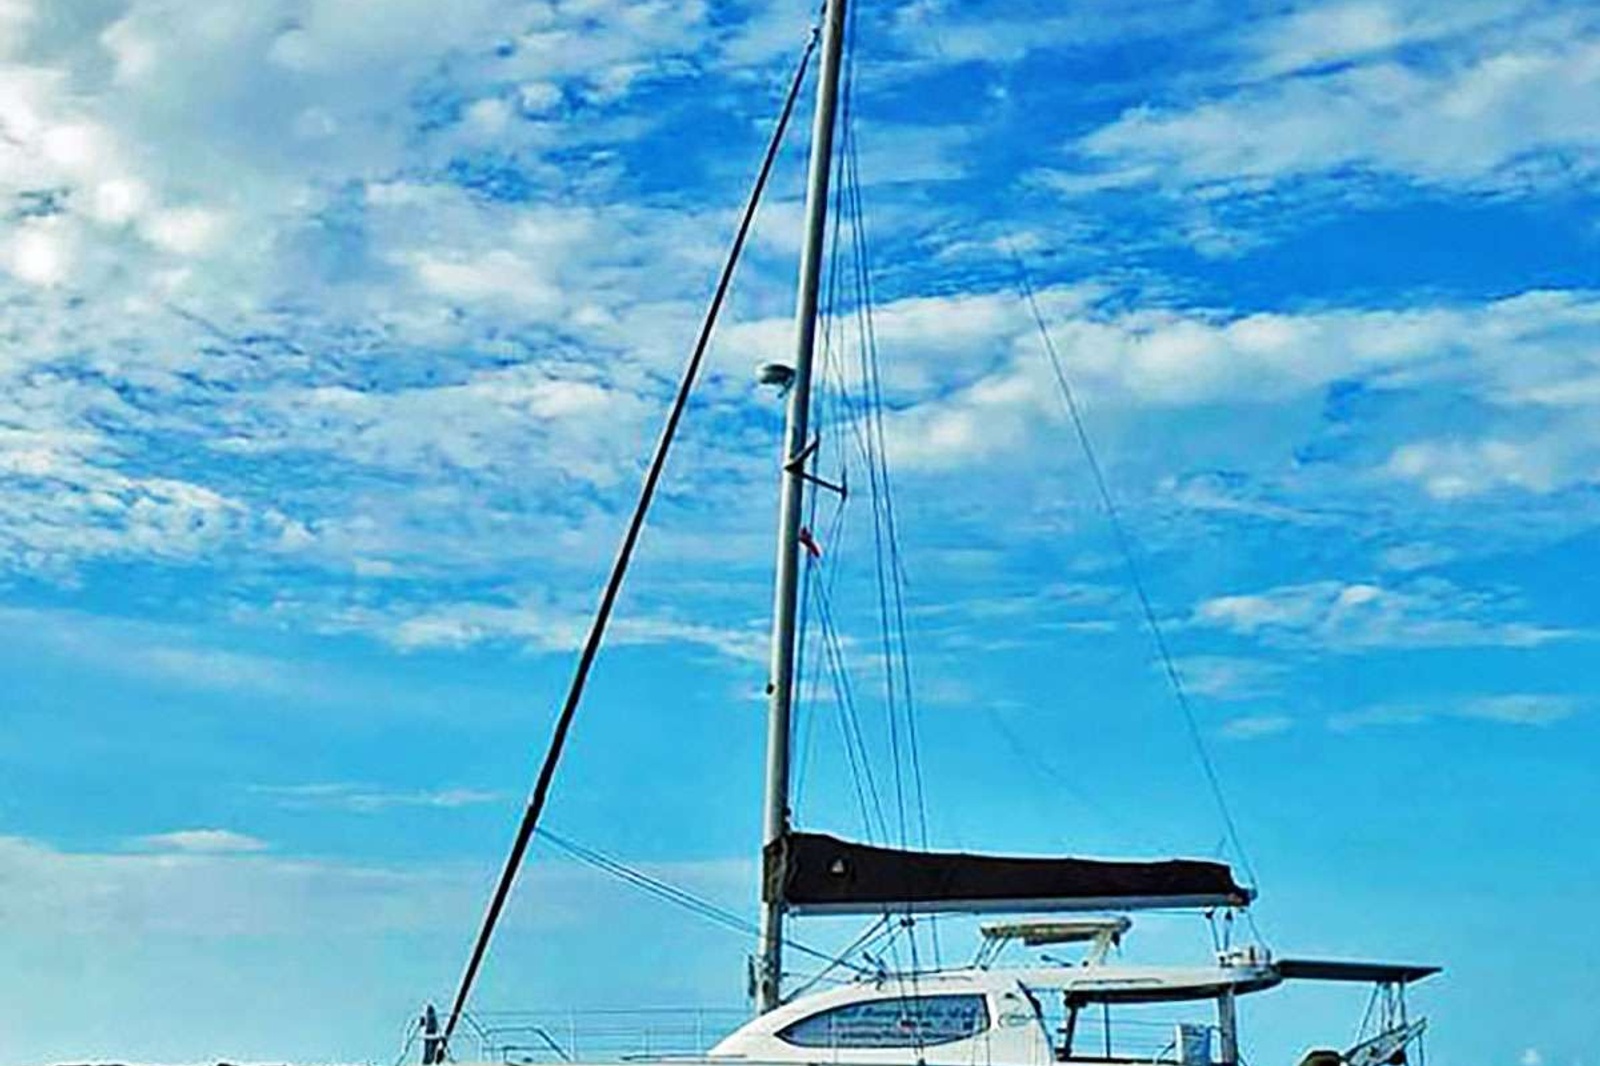 Getaway to Ft. Lauderdale, the Florida Keys, The Bahamas, or anywhere in between, on this lovely Leopard 46', The Space Between.  An ideal size for a family or couples, this sailing catamaran sleeps up to 6 passengers in 3 Queen, En-suite cabins. Each cabin is equipped with full shower, head, and great storage cupboards.

The deck space and living areas also create plenty of areas to lounge, dine, and take in the scenery. The unique cockpit table with map of the cruising region is always fun to check out as your journey to these beautiful destinations.